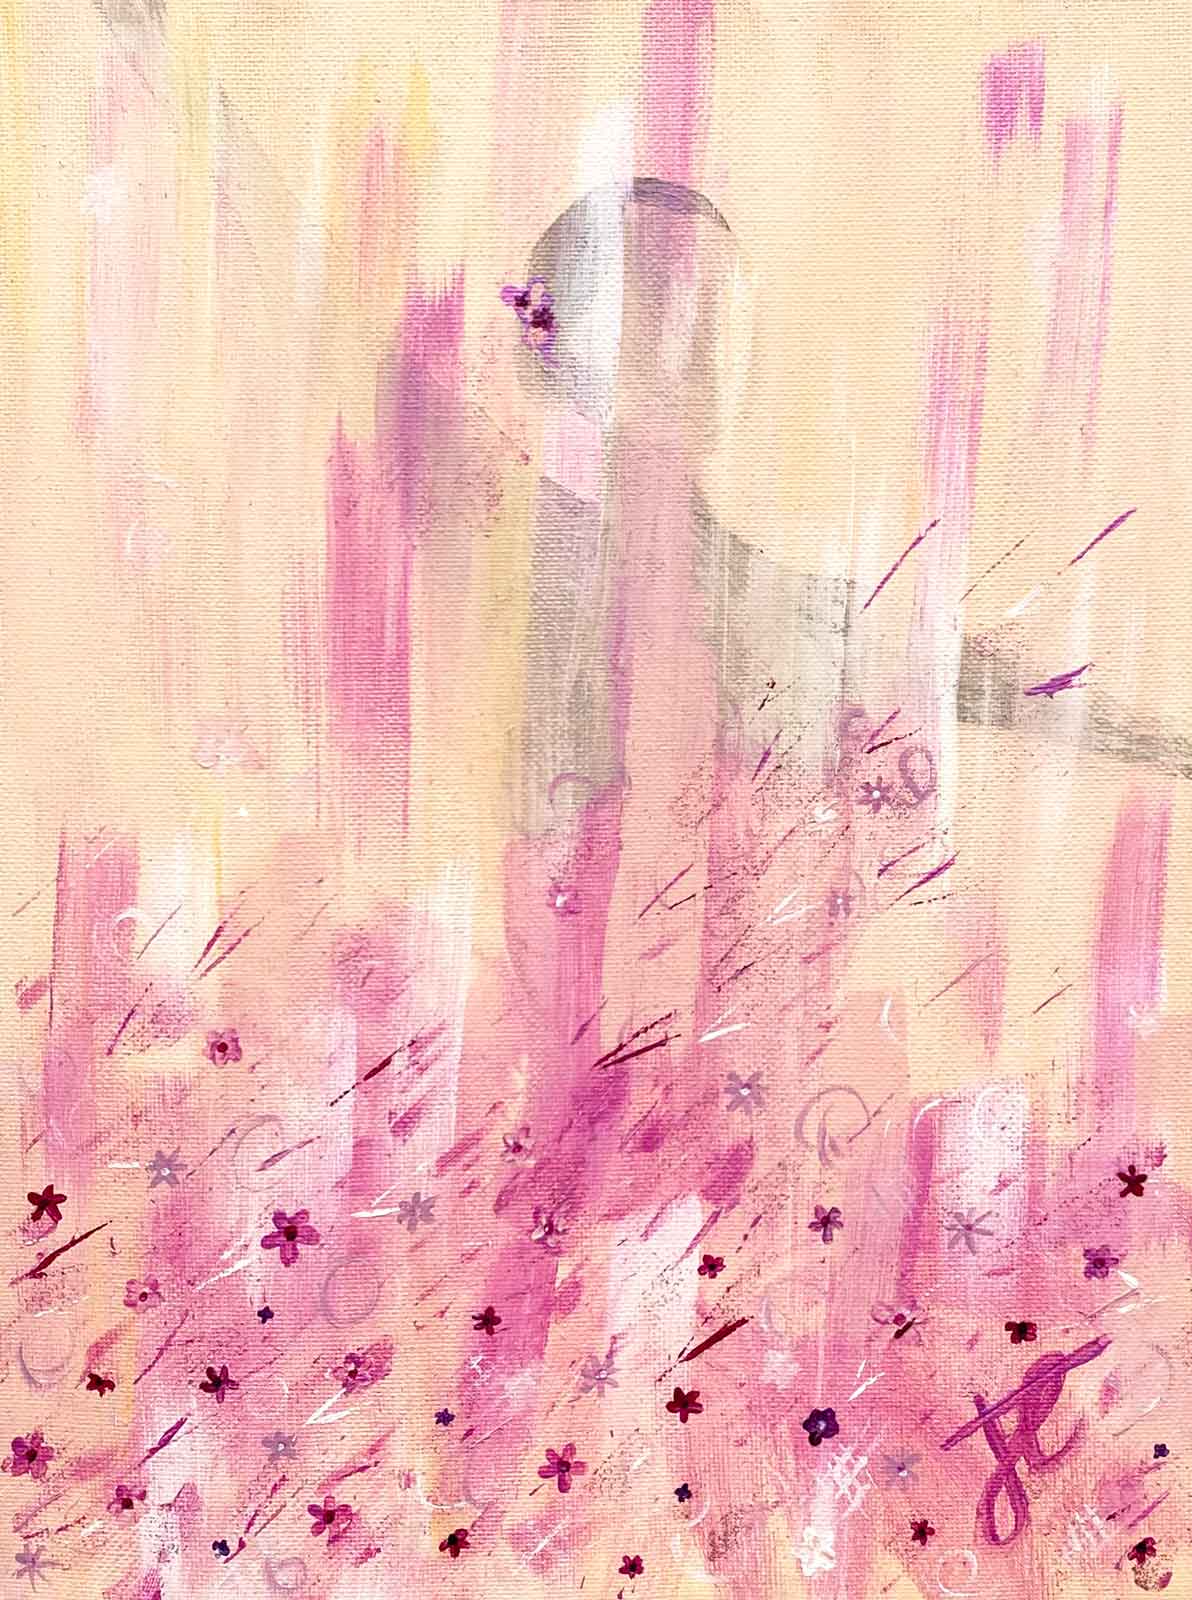 Painting of ballerina in pink tutu with gestural brushwork and decorative flowers